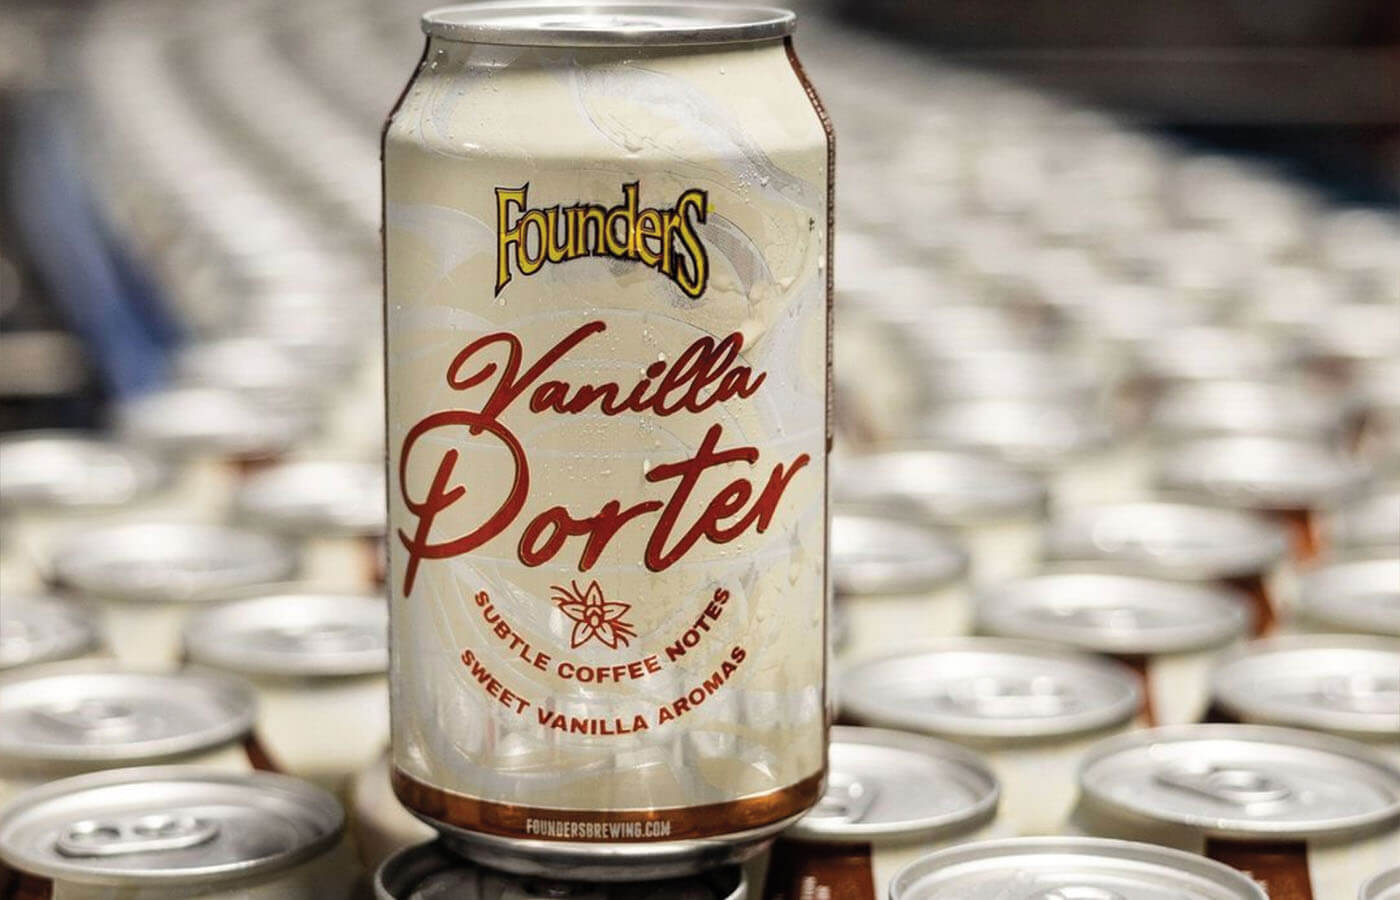 Can of Vanilla Porter stacked on other cans